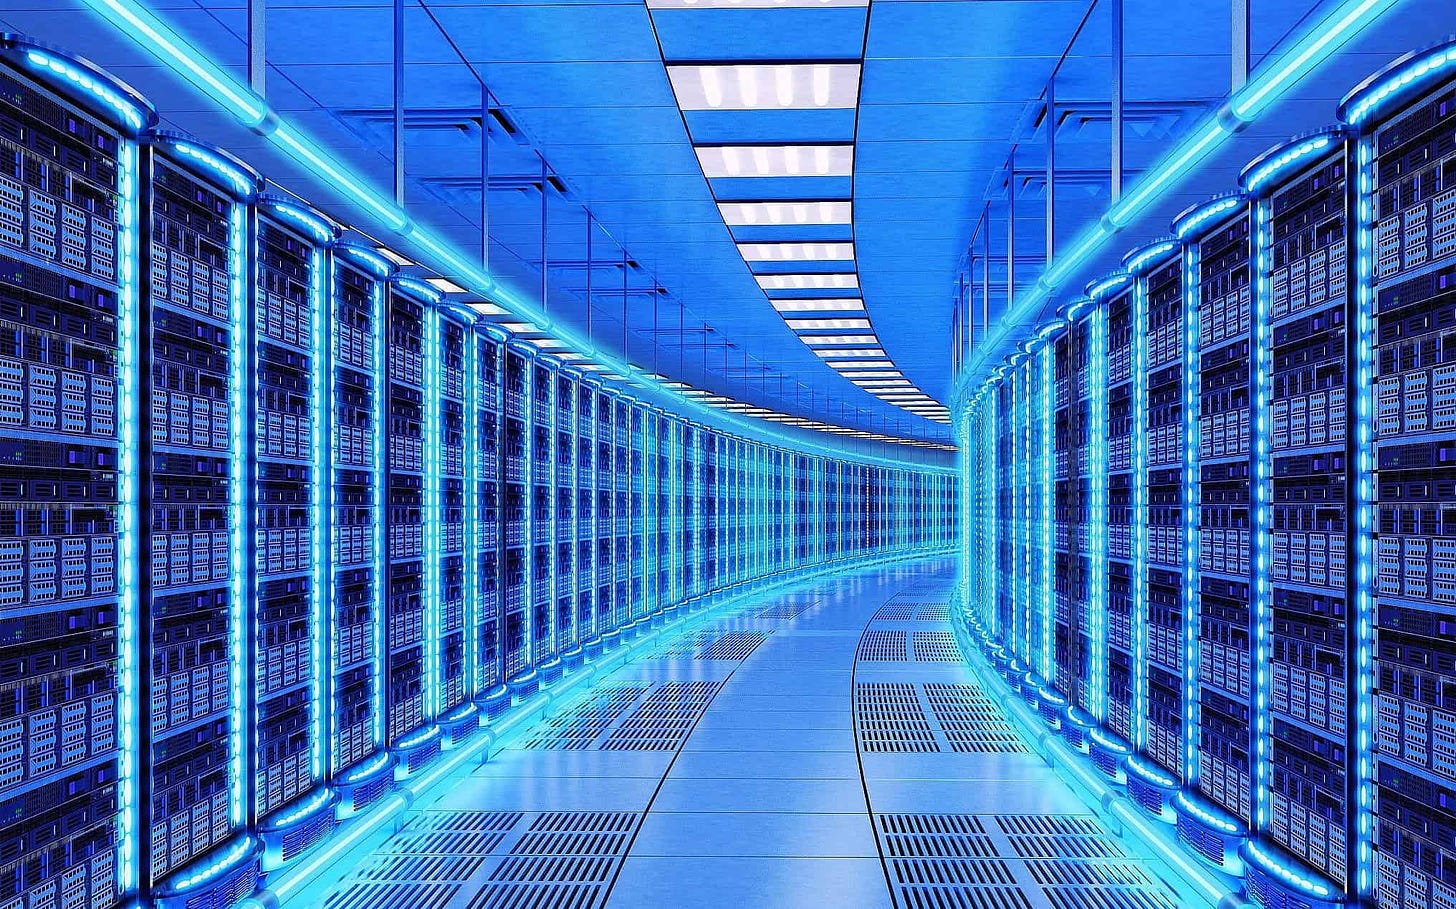 Transitioning from Data Centers to Edge Data Center: The Next Chapter